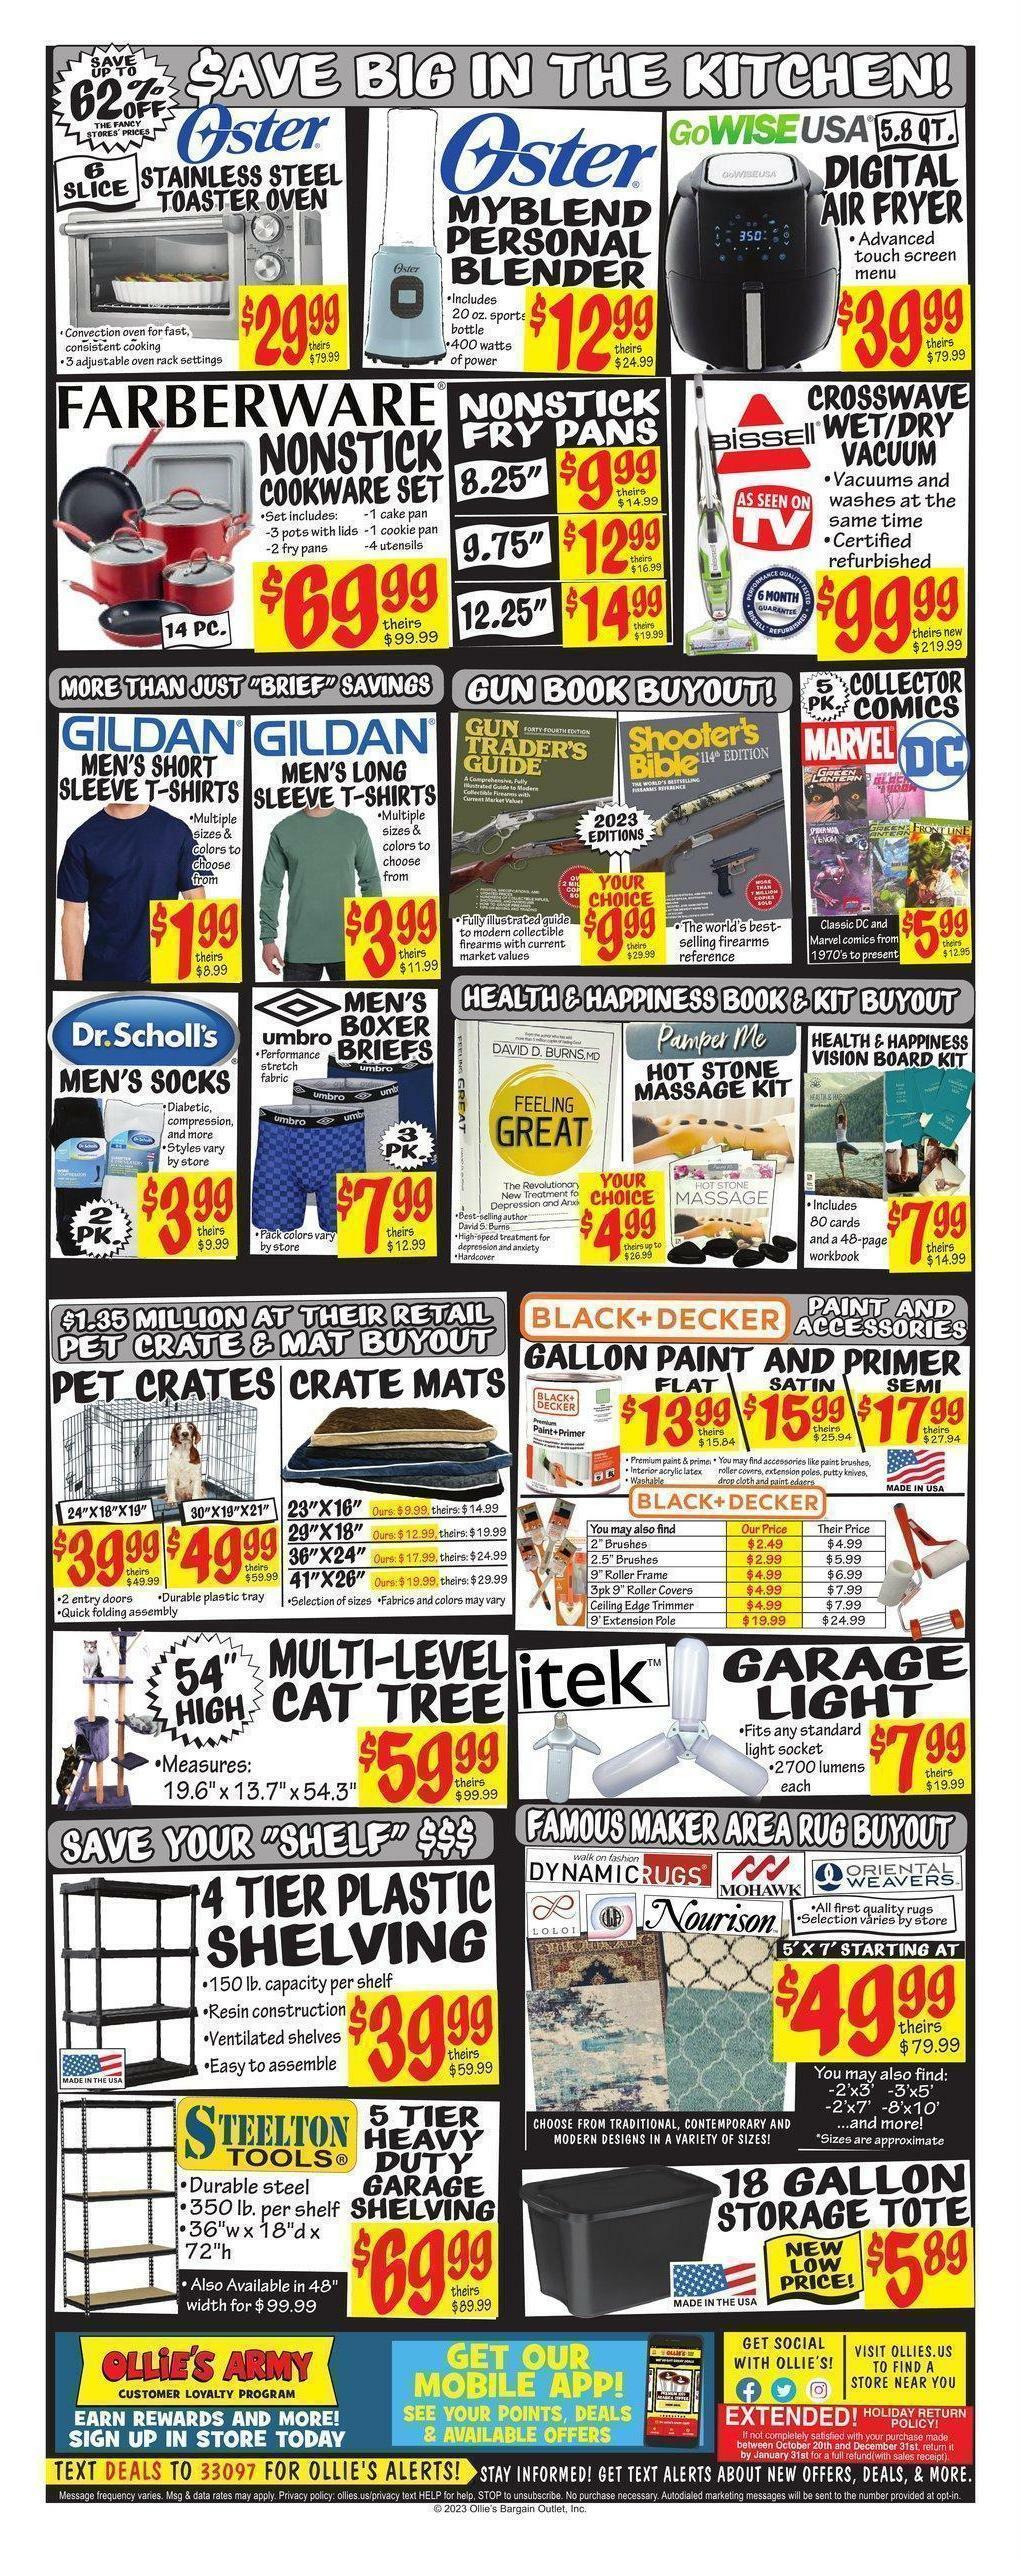 Ollie's Bargain Outlet Weekly Ad from January 12